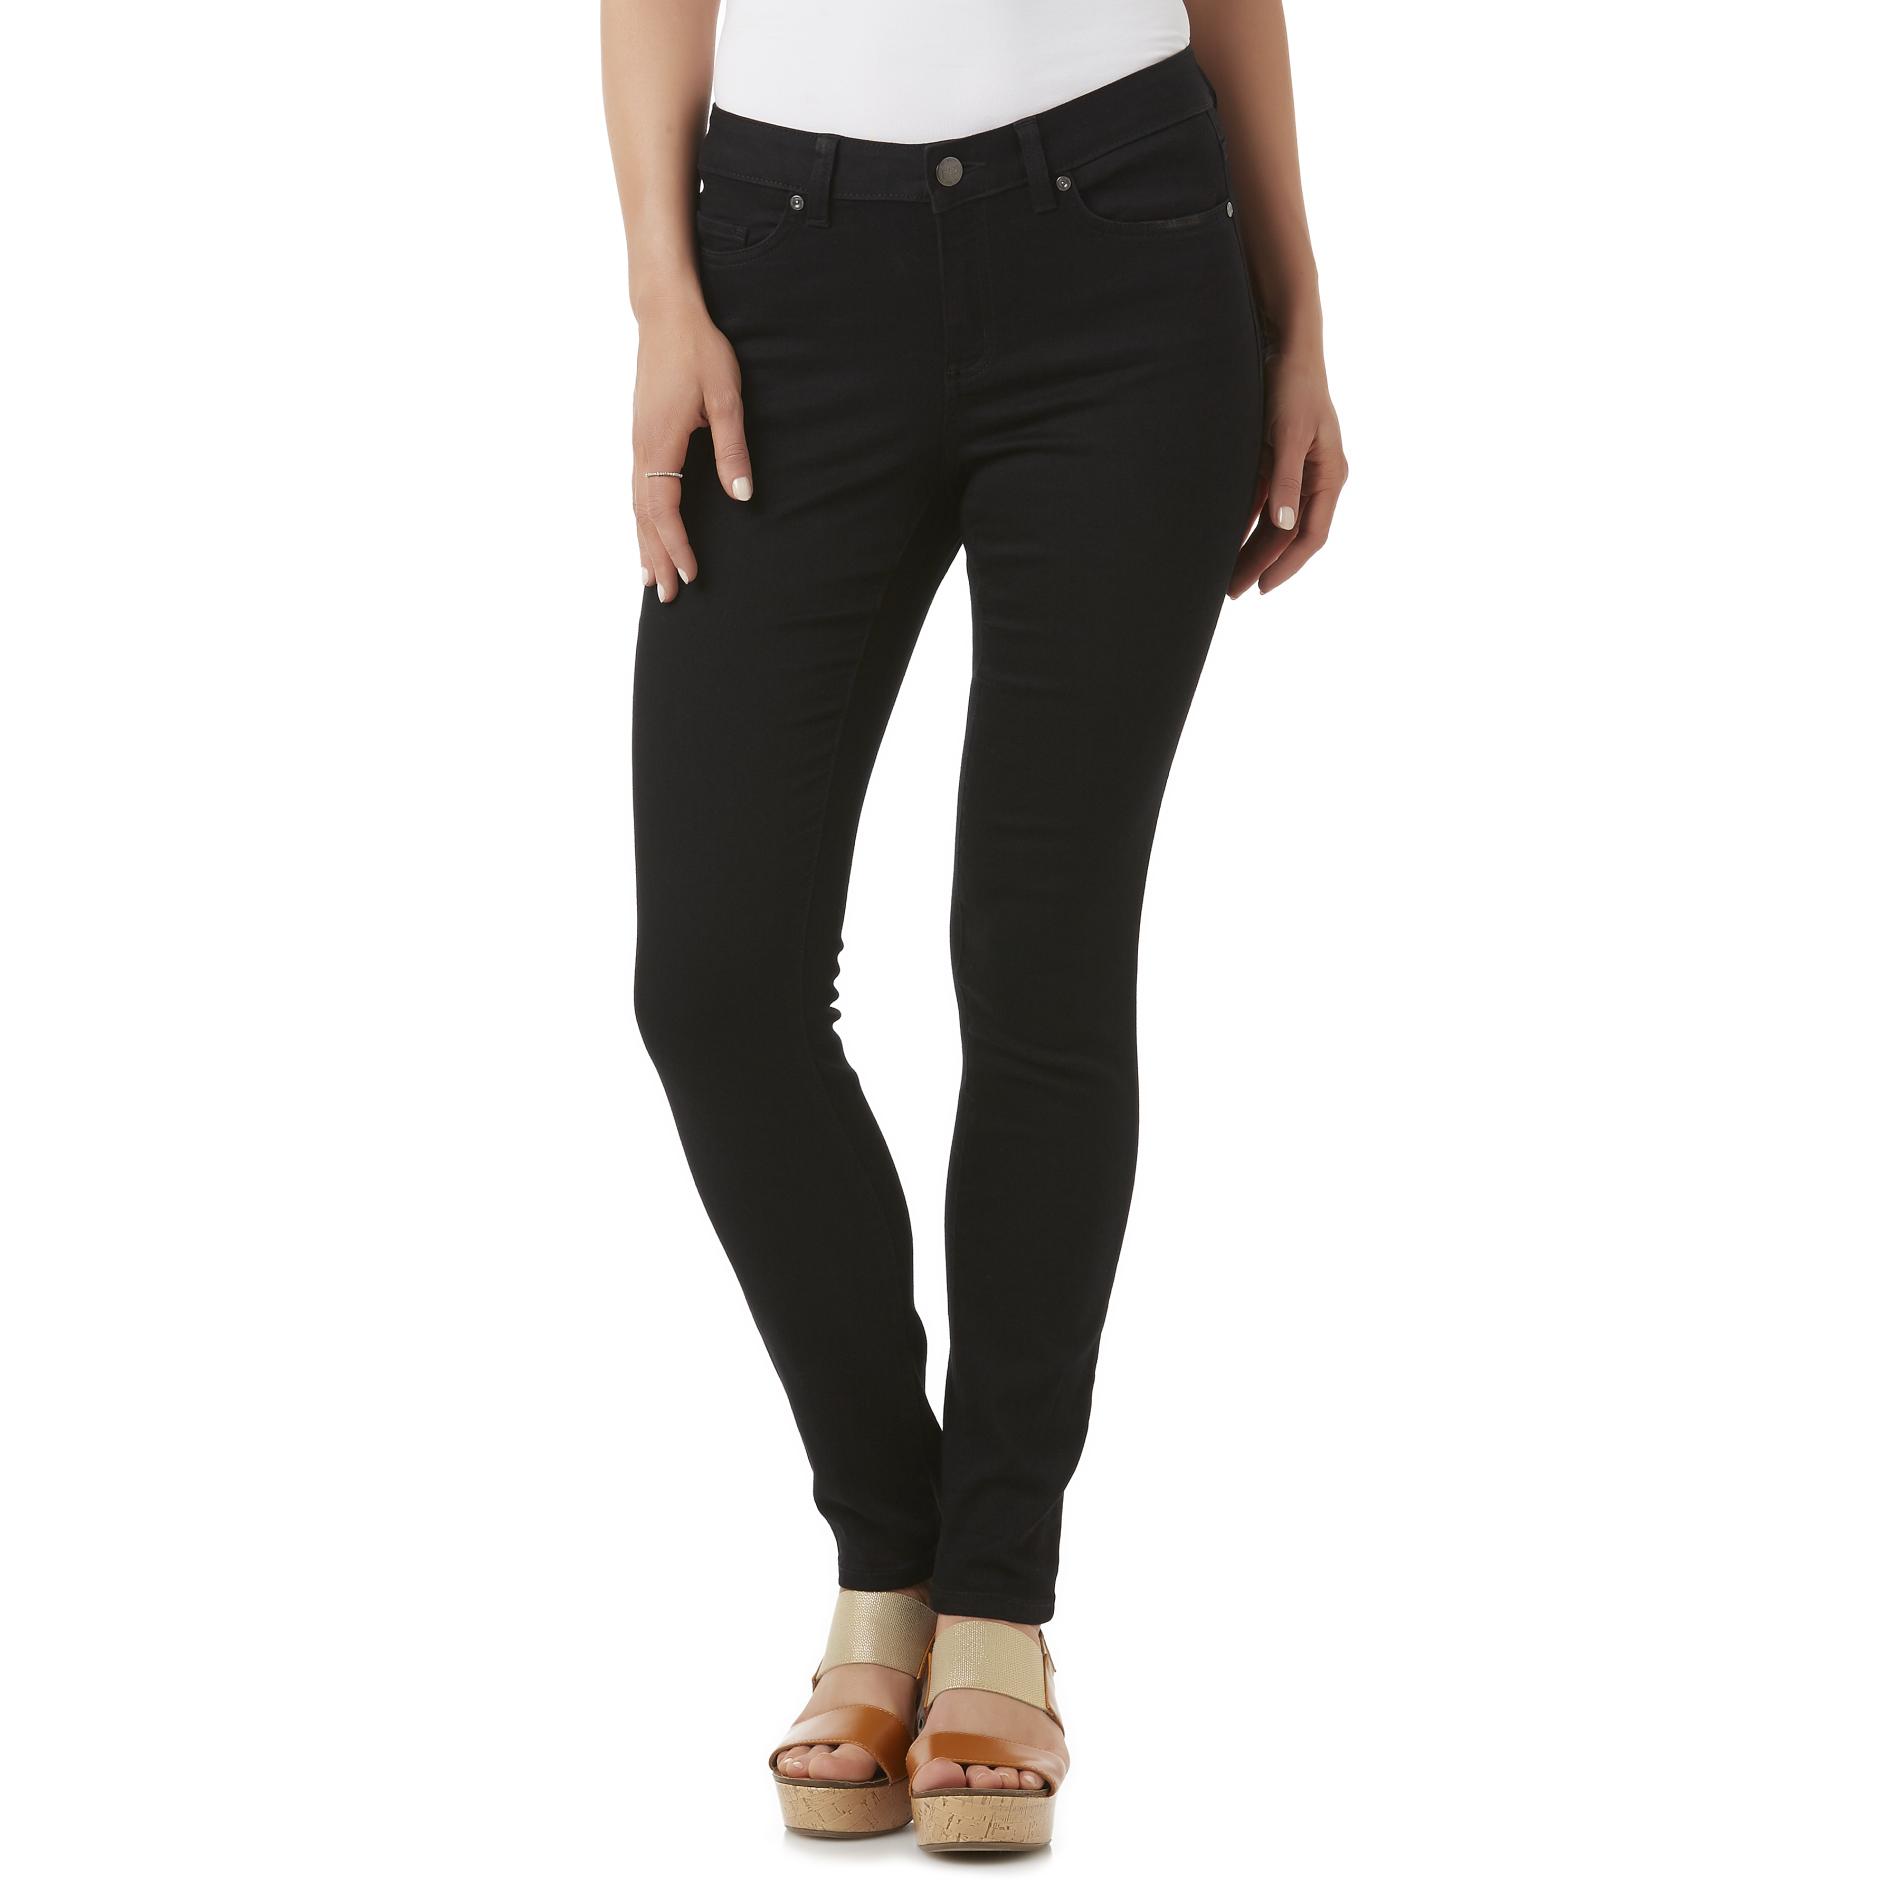 R1893 Women's Colored Jeggings - Sears